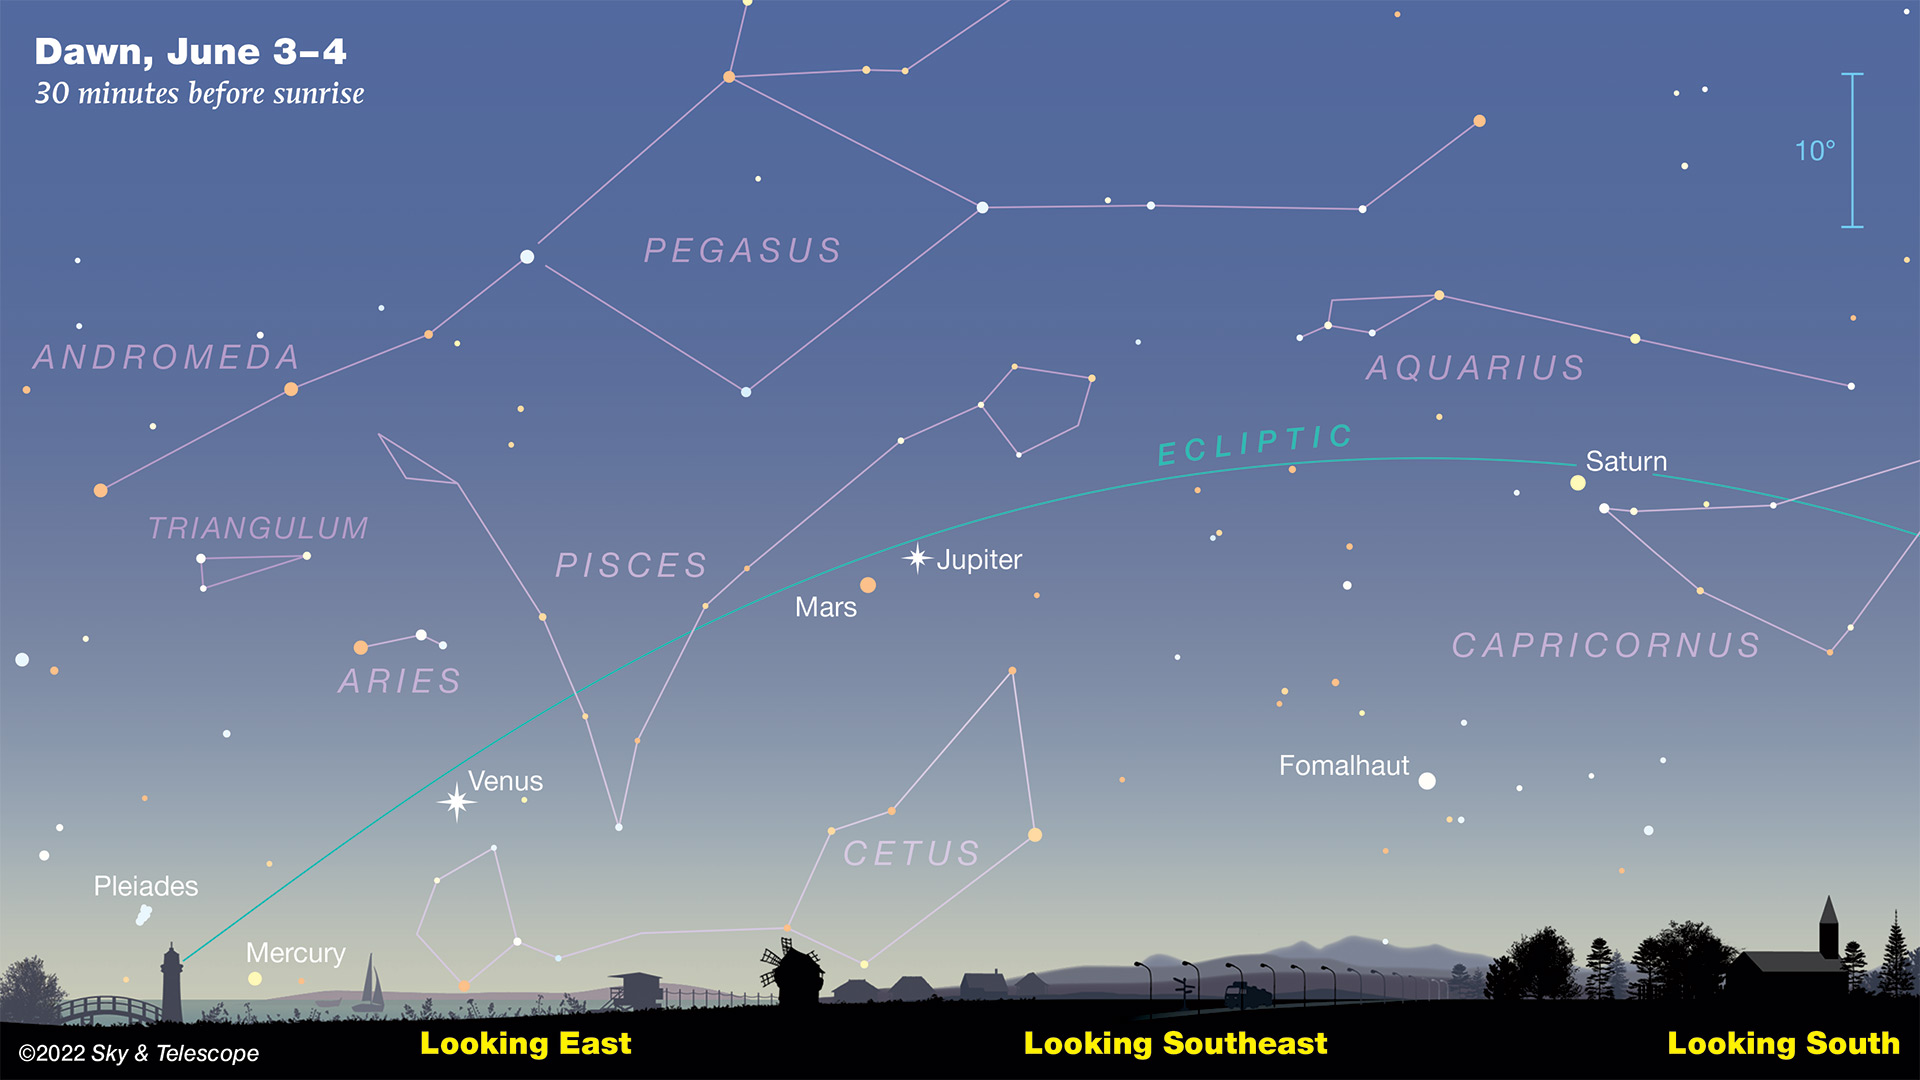 See 5 align in the night sky this month in a rare treat! Space